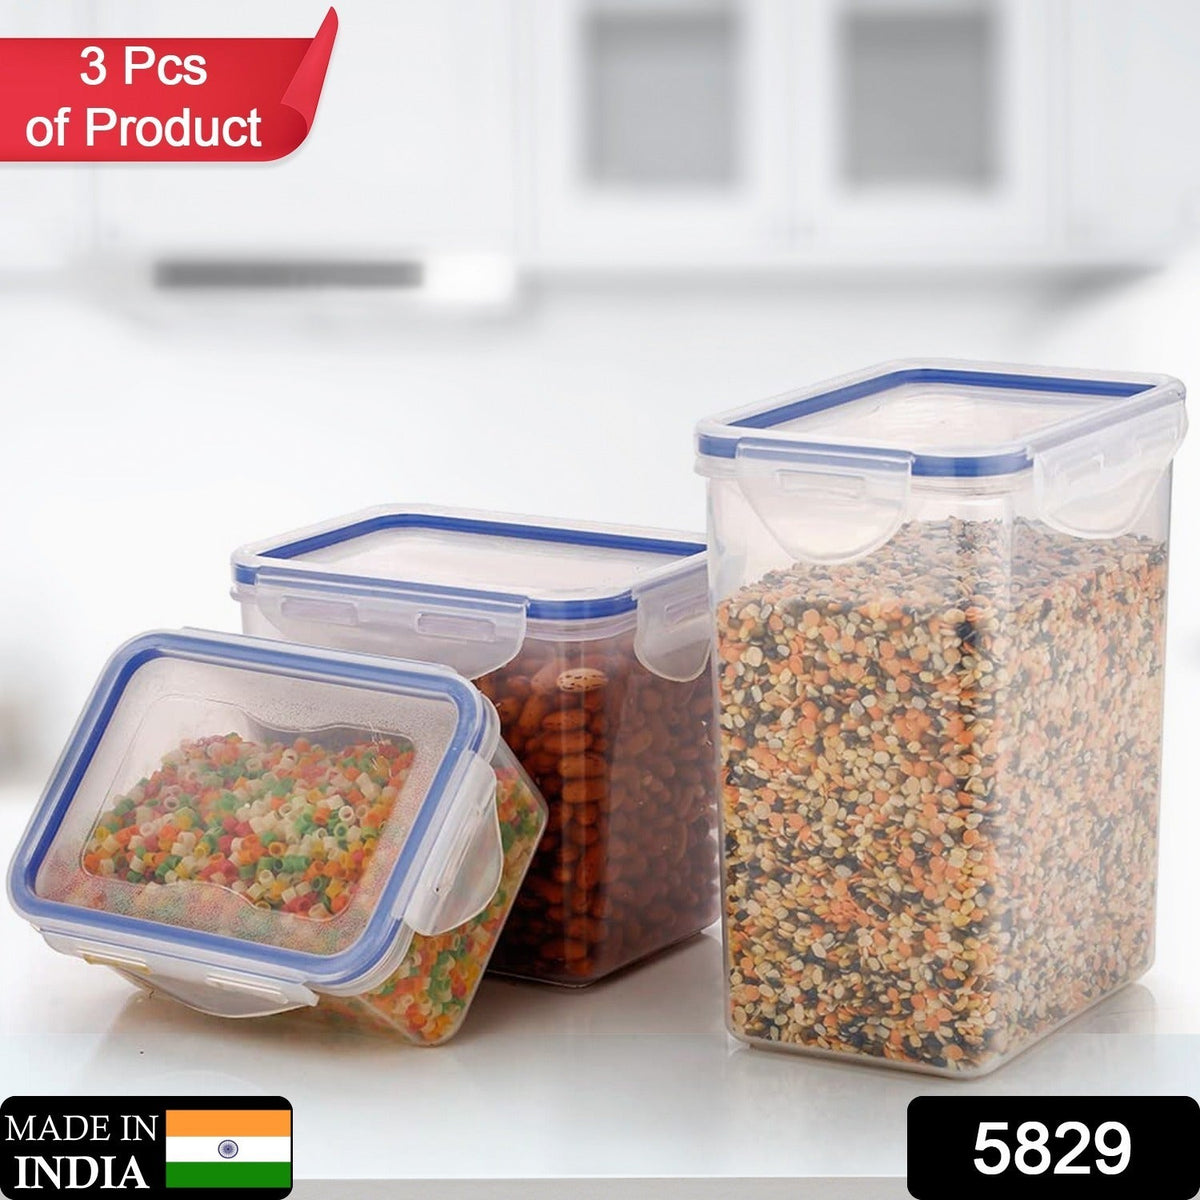 5829 Classics Rectangular Plastic Airtight Food Storage Containers with Leak Proof Locking Lid Storage container set of 3 Pc( Approx Capacity 500ml,1000ml,1500ml, Transparent)